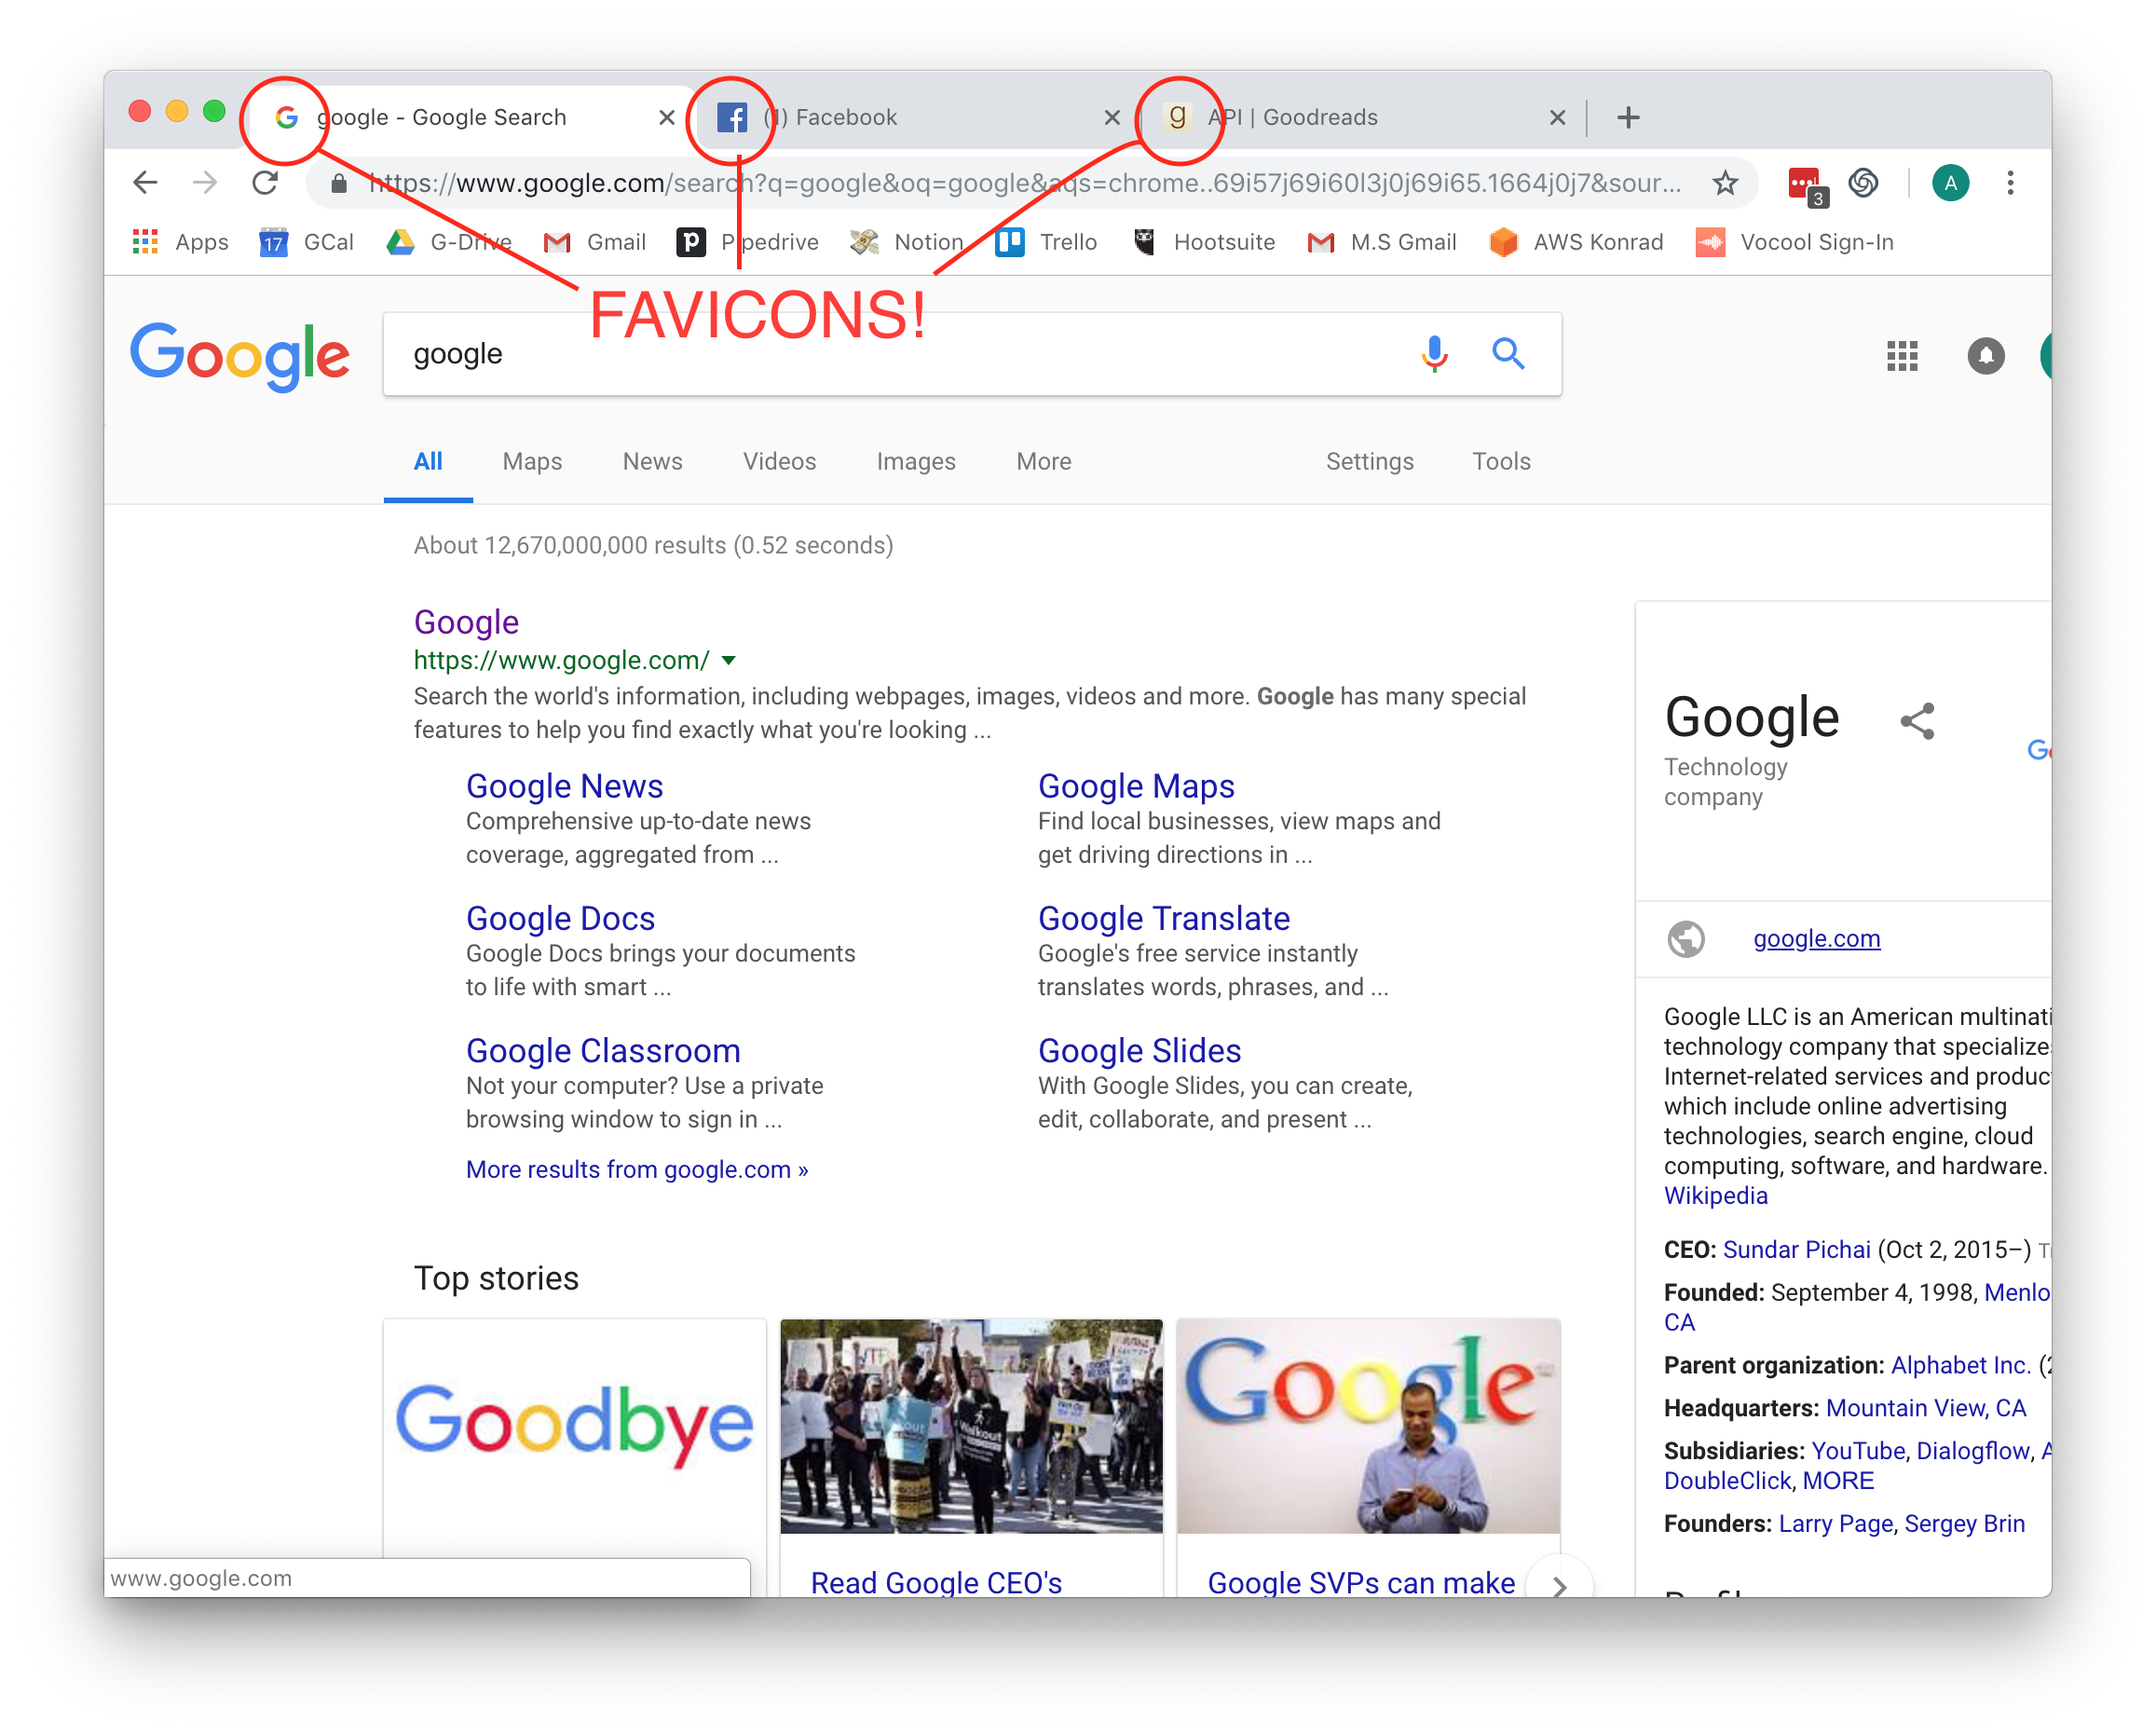 Example of Website Favicons